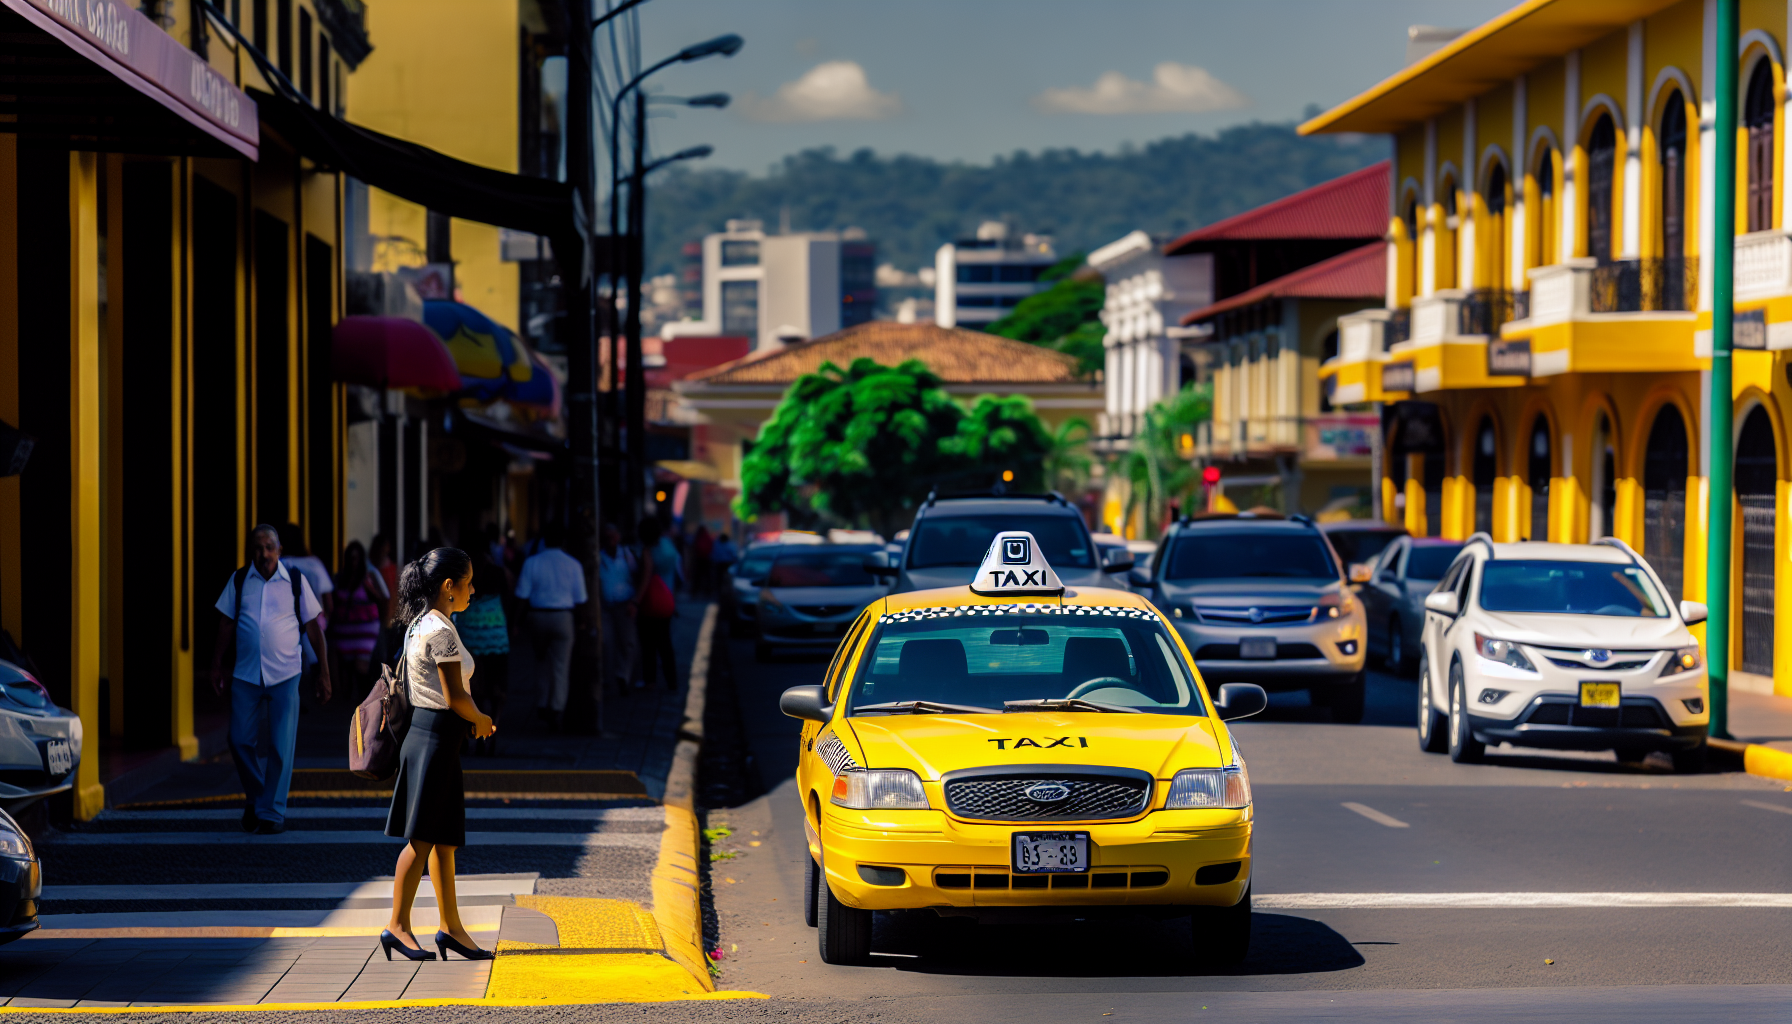 Comparing Uber and taxi fares in Costa Rica